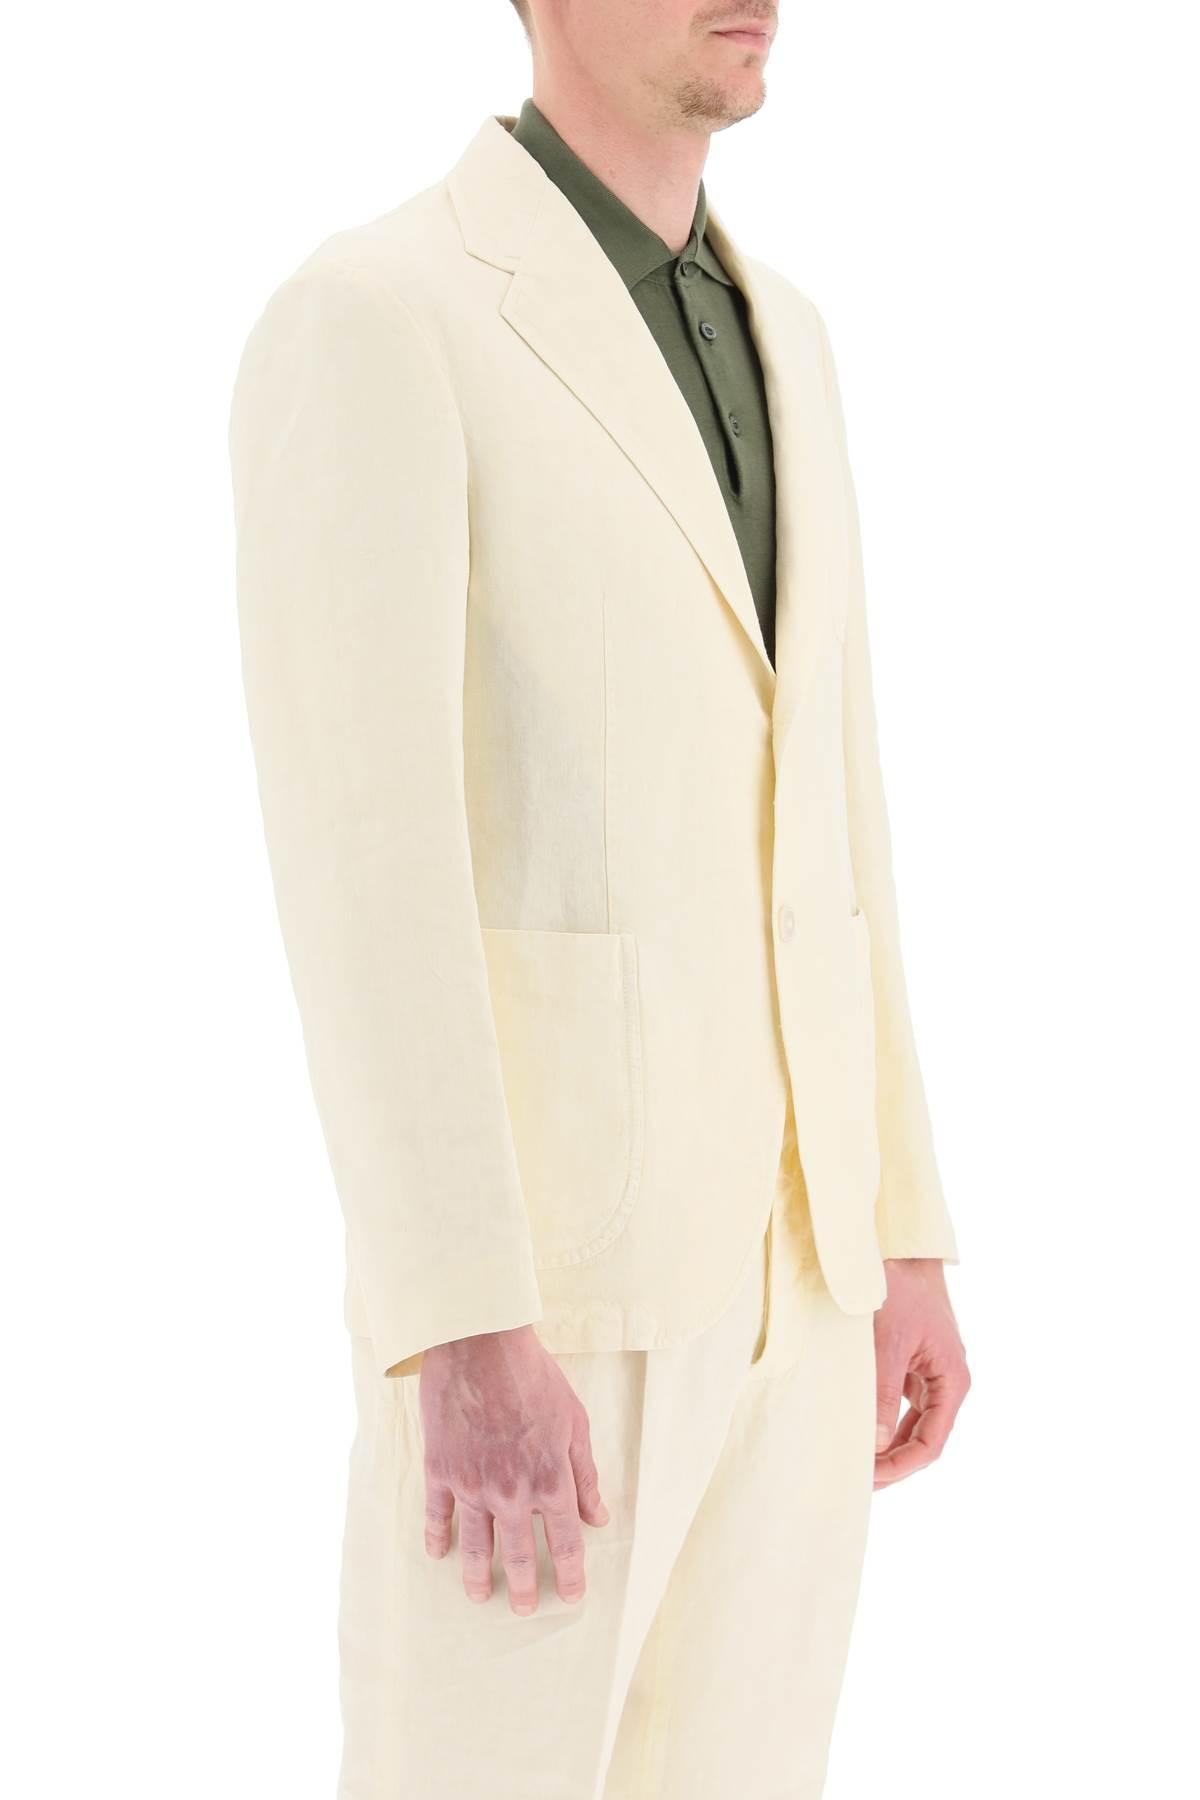 Mens Clothing Jackets Blazers Natural for Men The Gigi Cotton Suit Jacket in Beige 